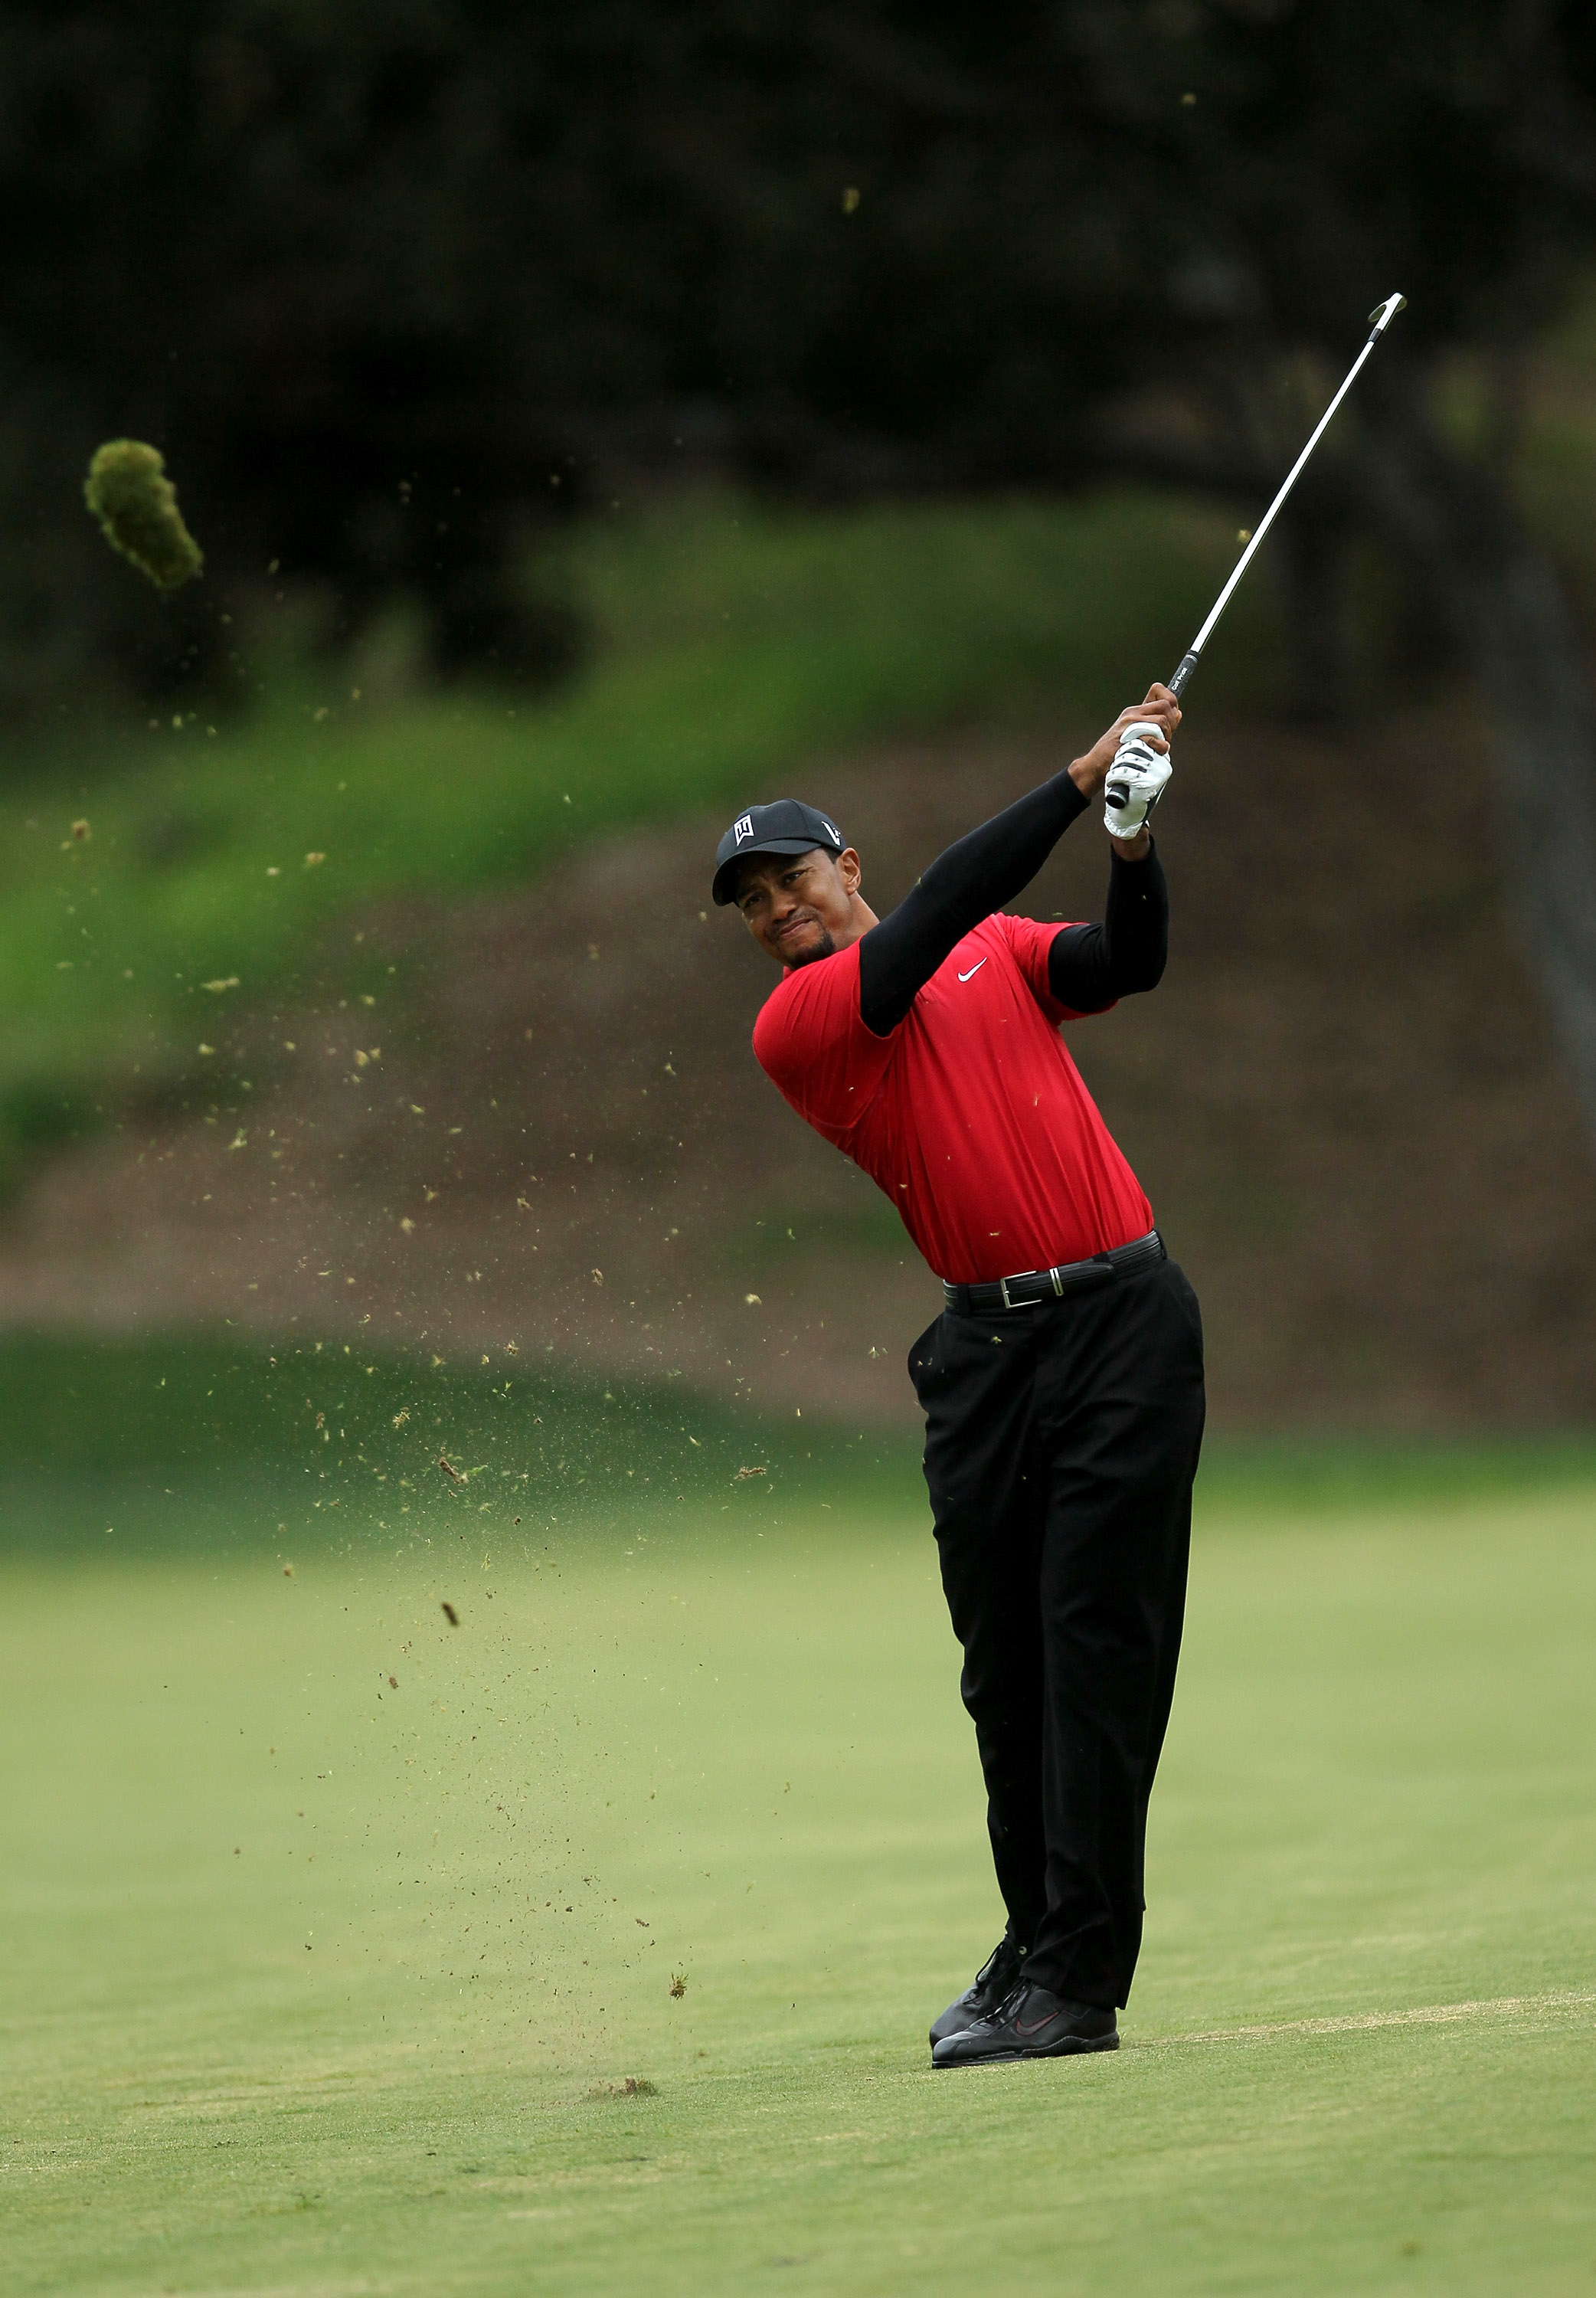 THOUSAND OAKS, CA - DECEMBER 05:  Tiger Woods hits his second shot on the 18th hole during the final round of the Chevron World Challenge at Sherwood Country Club on December 5, 2010 in Thousand Oaks, California.  (Photo by Stephen Dunn/Getty Images)